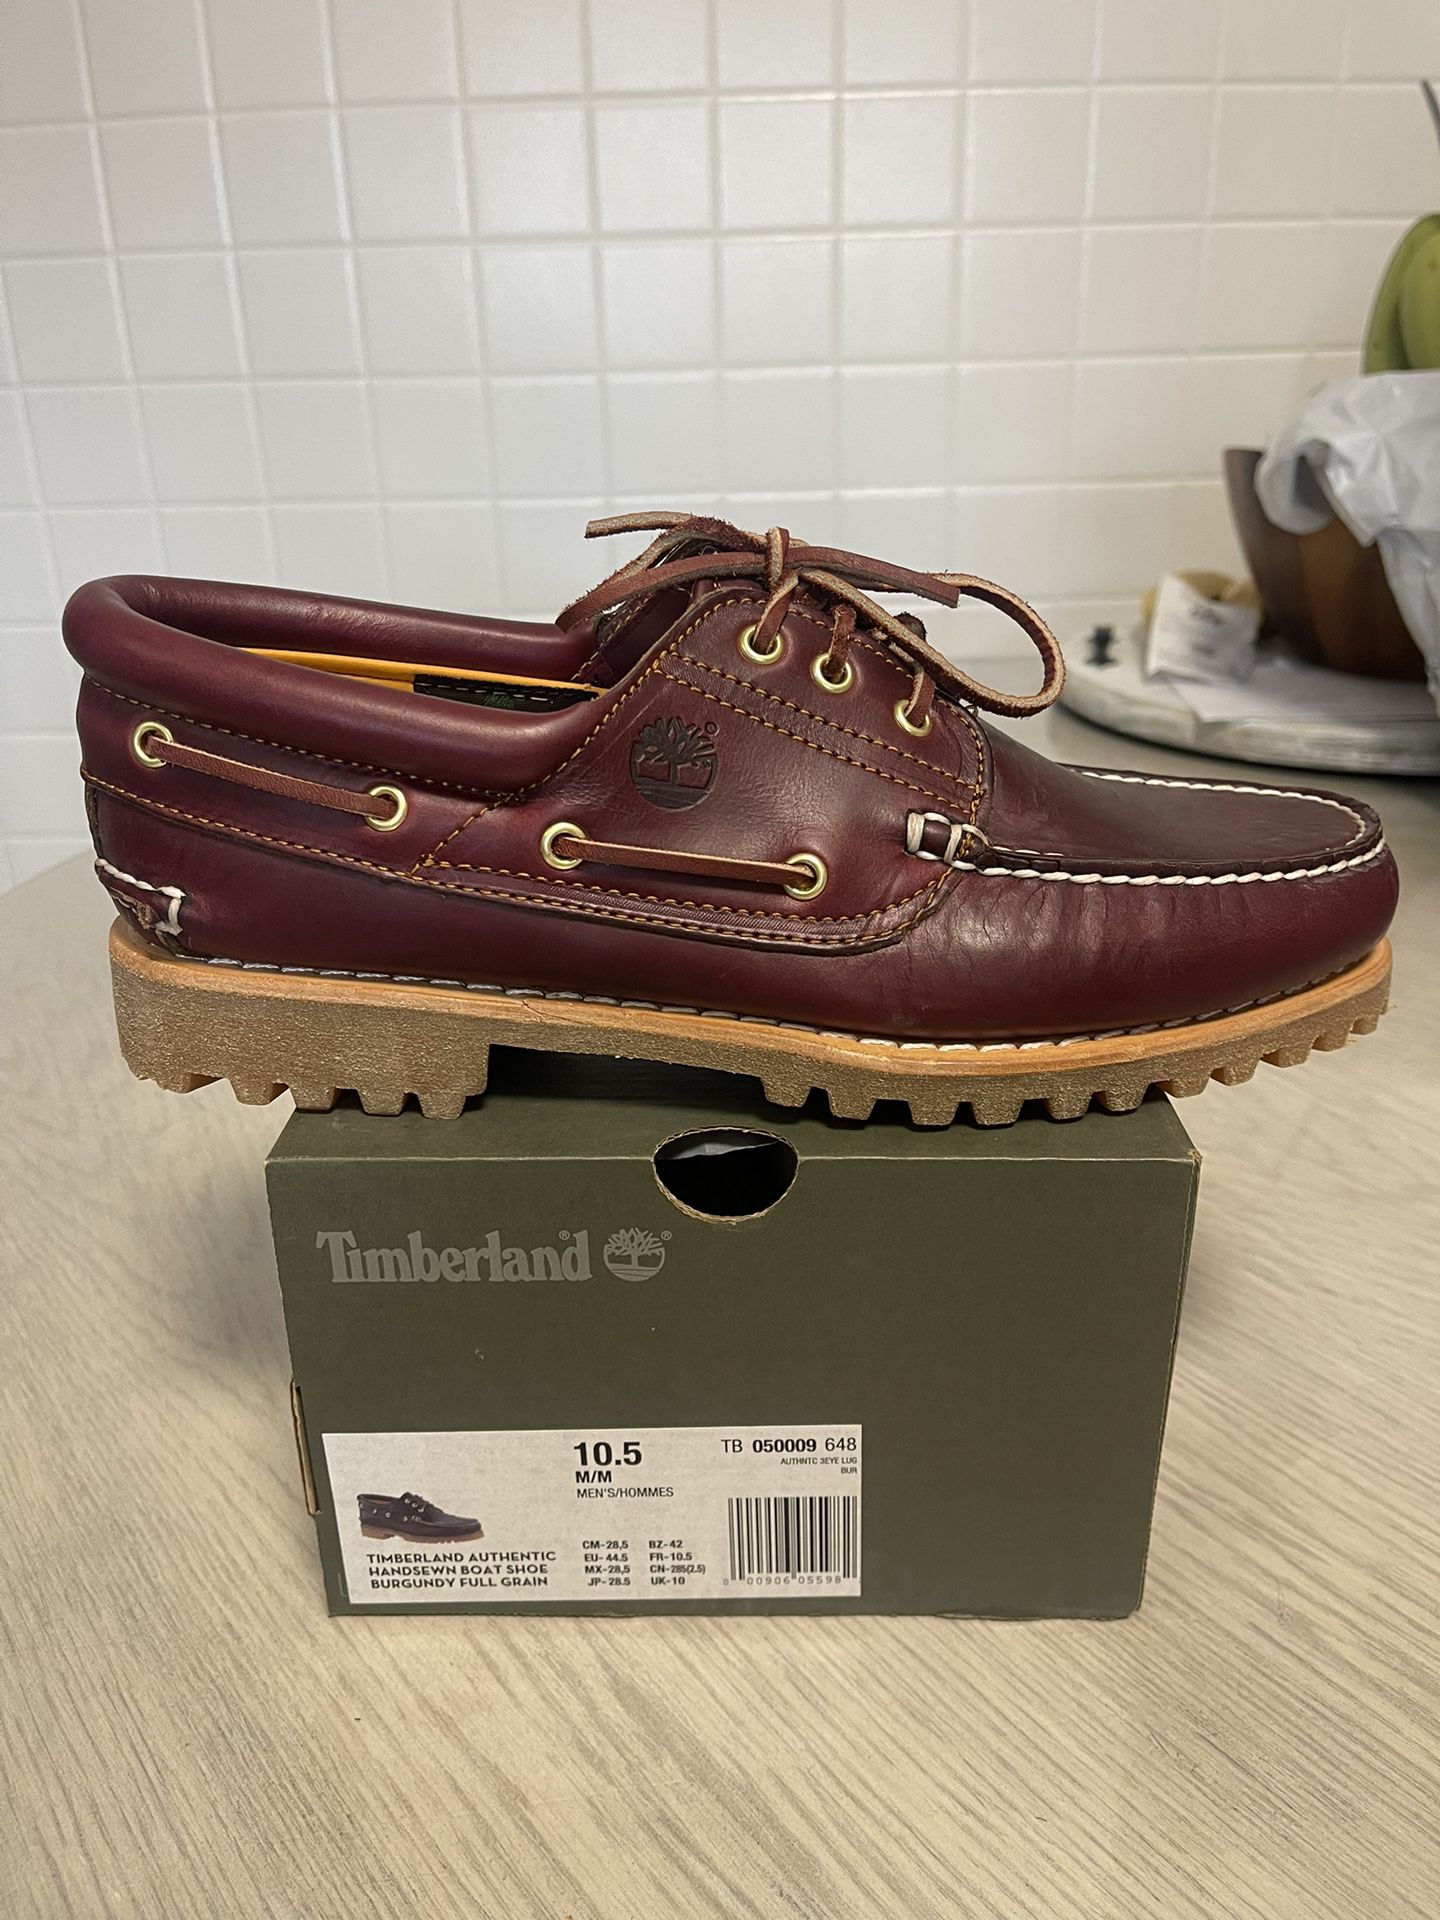 Mens Timberland Boat Shoes Brand New Size Sale in Chicago, - OfferUp